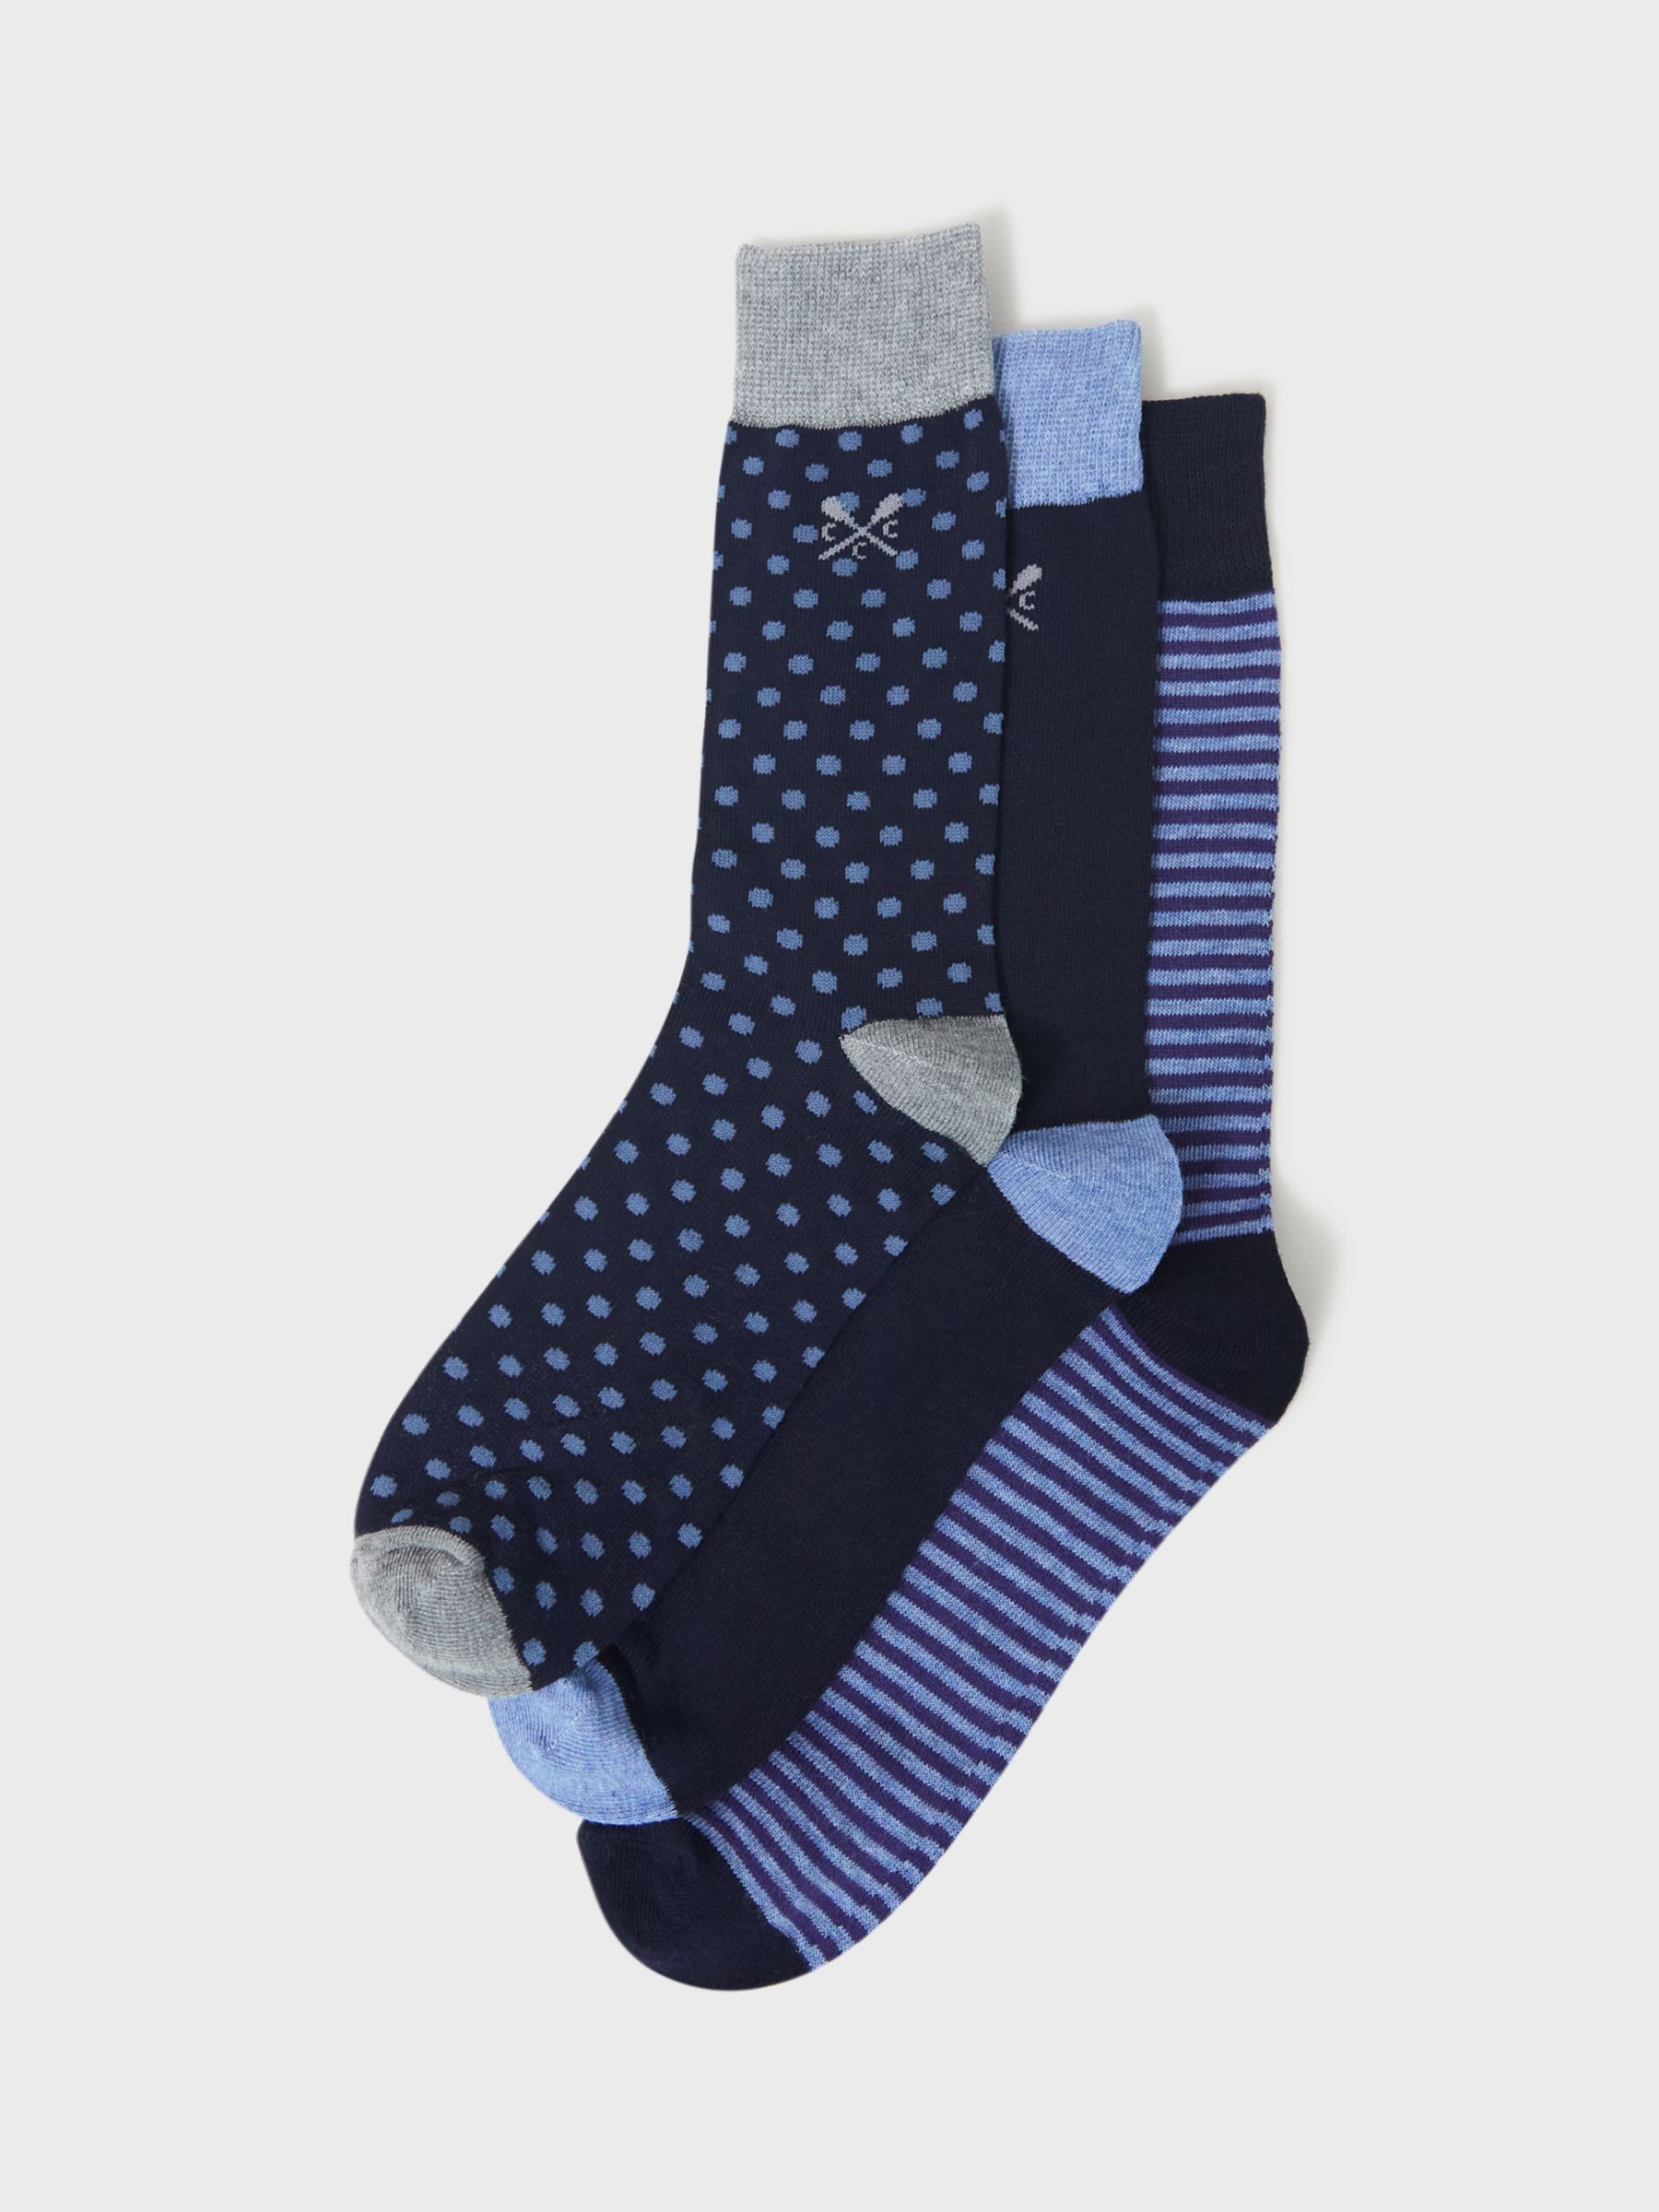 Crew Clothing Bamboo Blend Socks, Pack of 3, Navy Blue, One Size